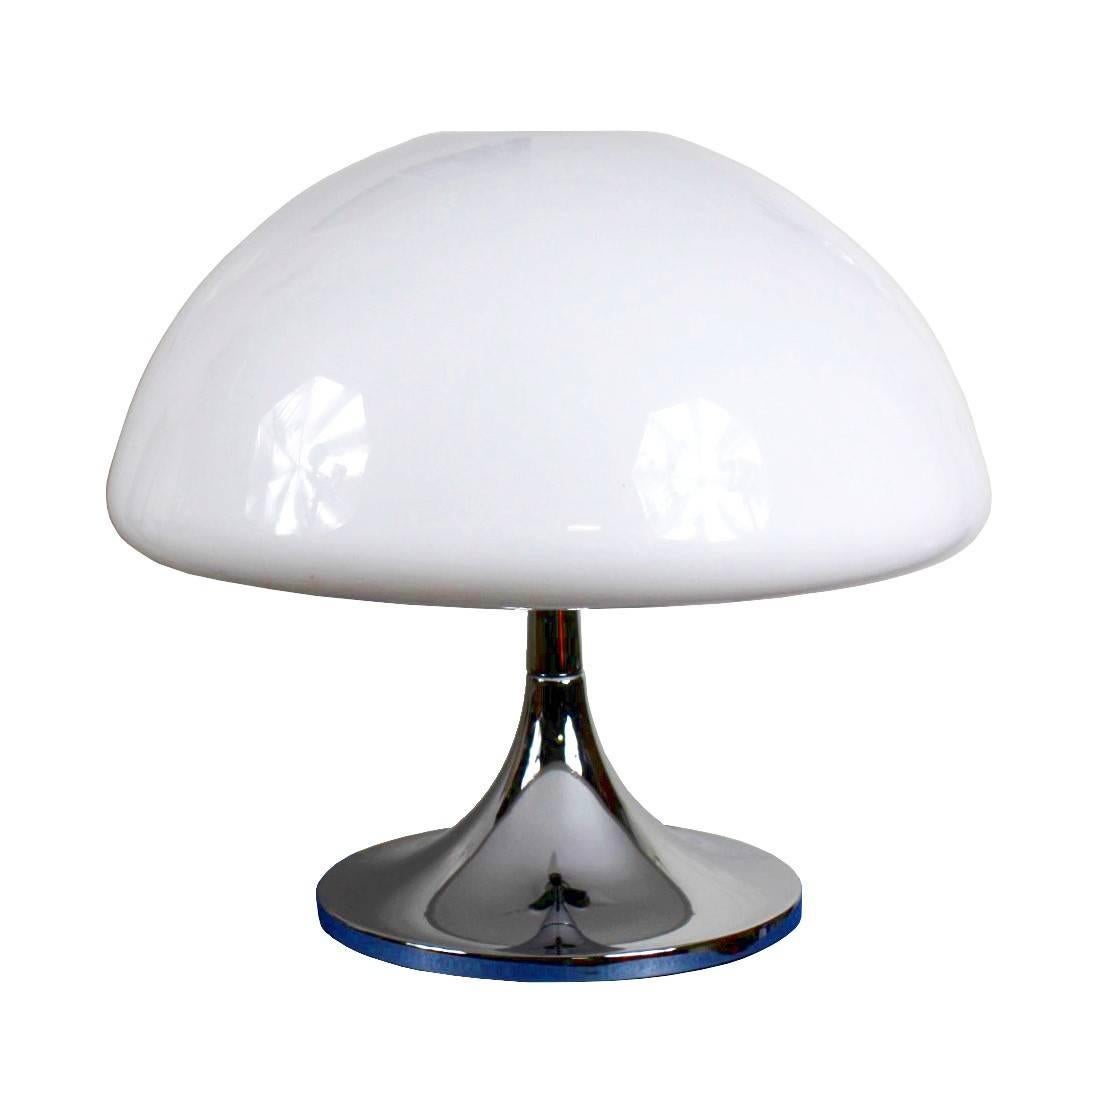 Large table lamp made in the 1970s by iGuzzini in Italy. The lamp is made from chrome-plated metal tulip base and white plastic shade. Excellent original condition.